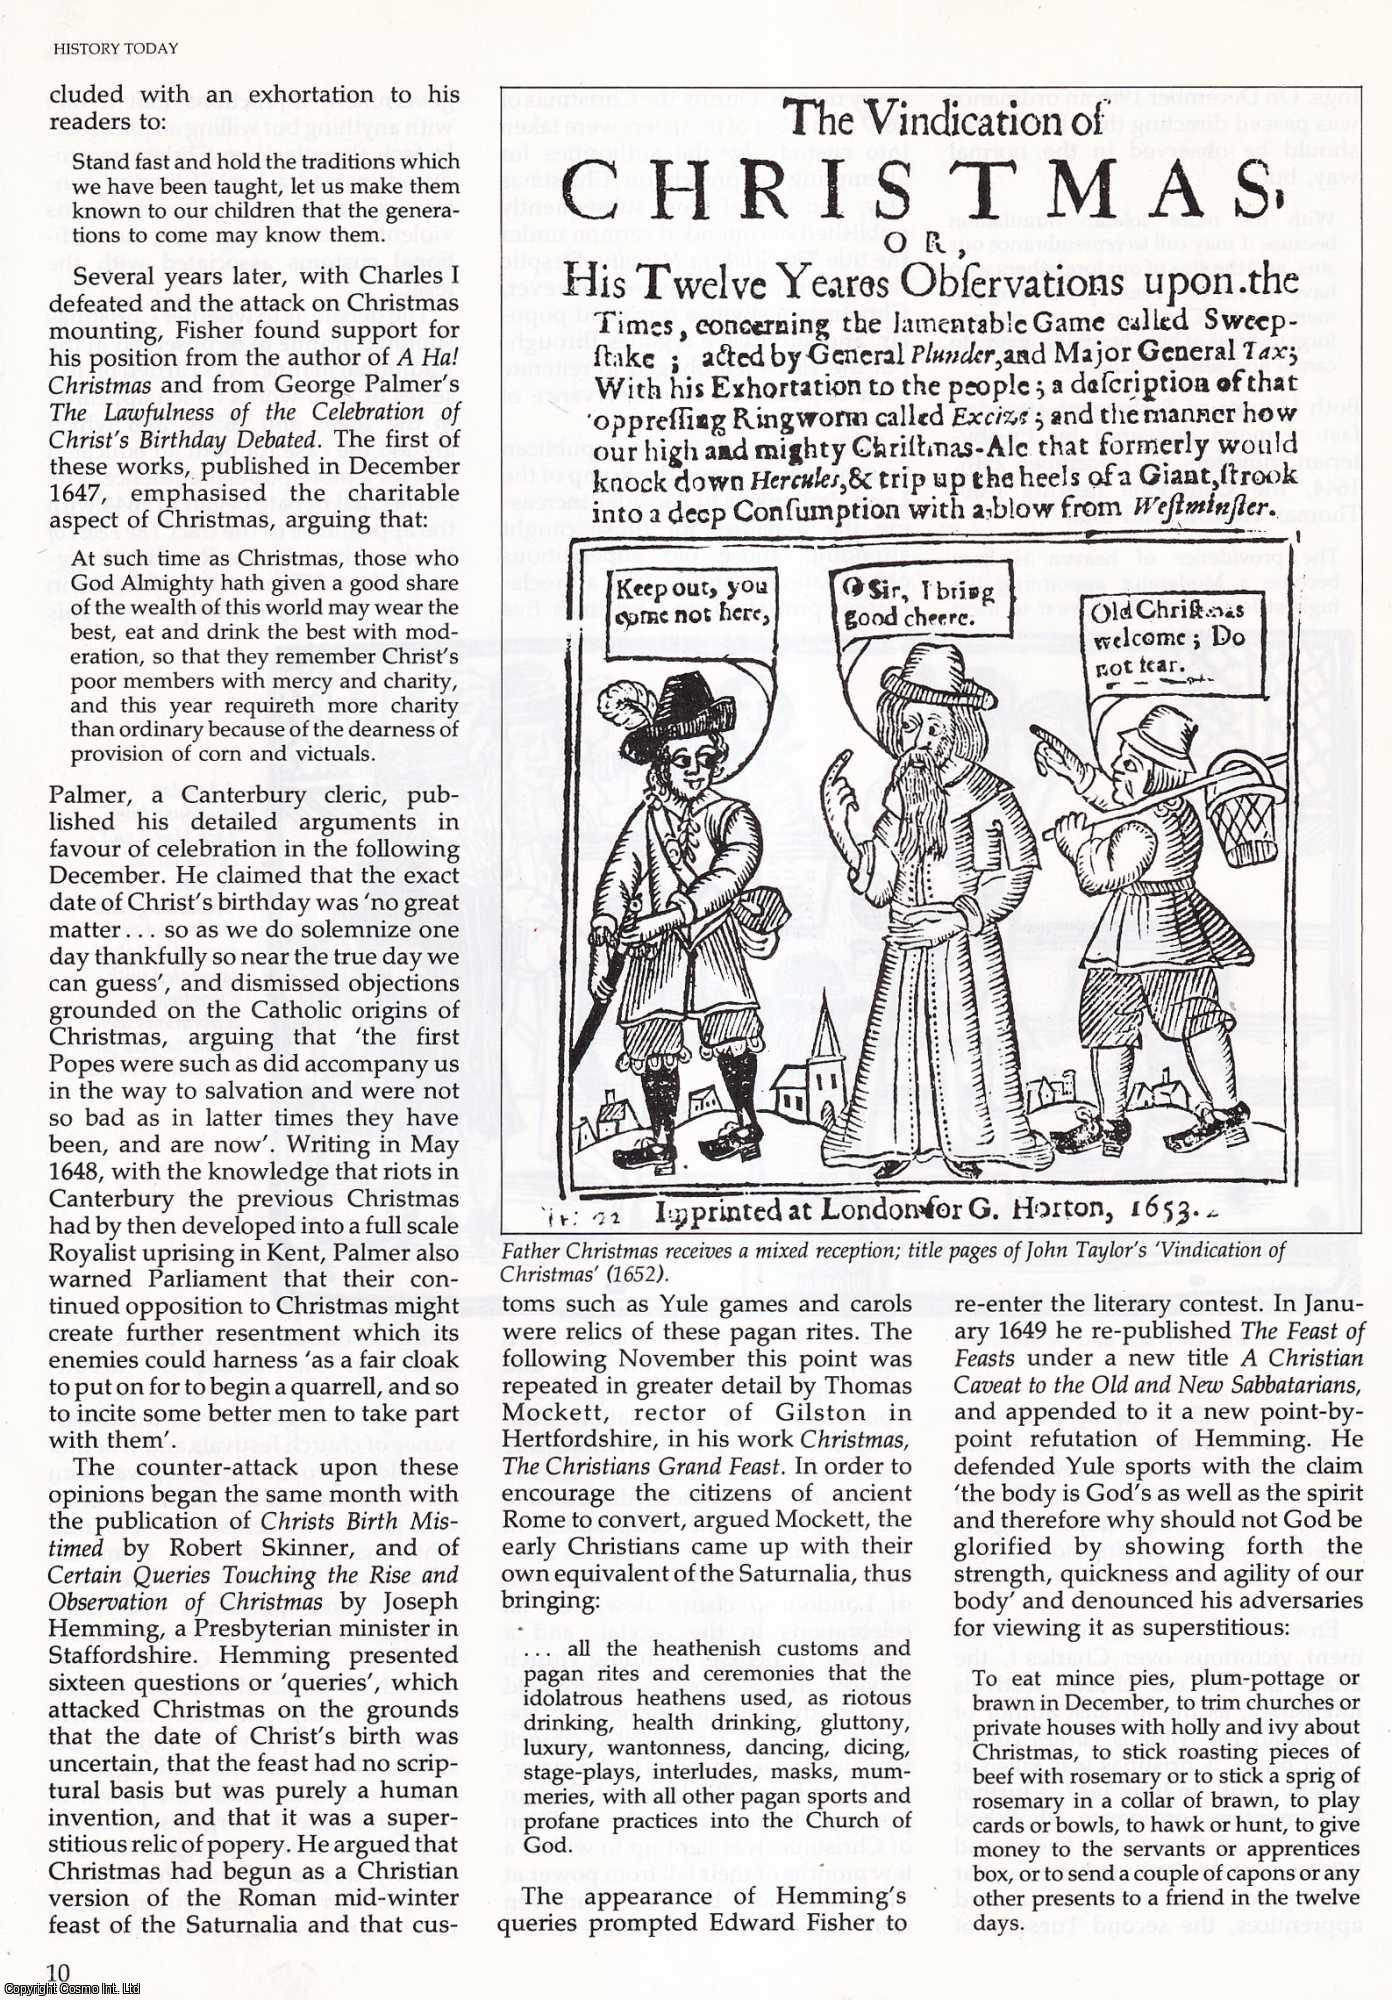 Chris Durston - Lords of Misrule: The Puritan War on Christmas, 1642-60. An original article from History Today, 1985.